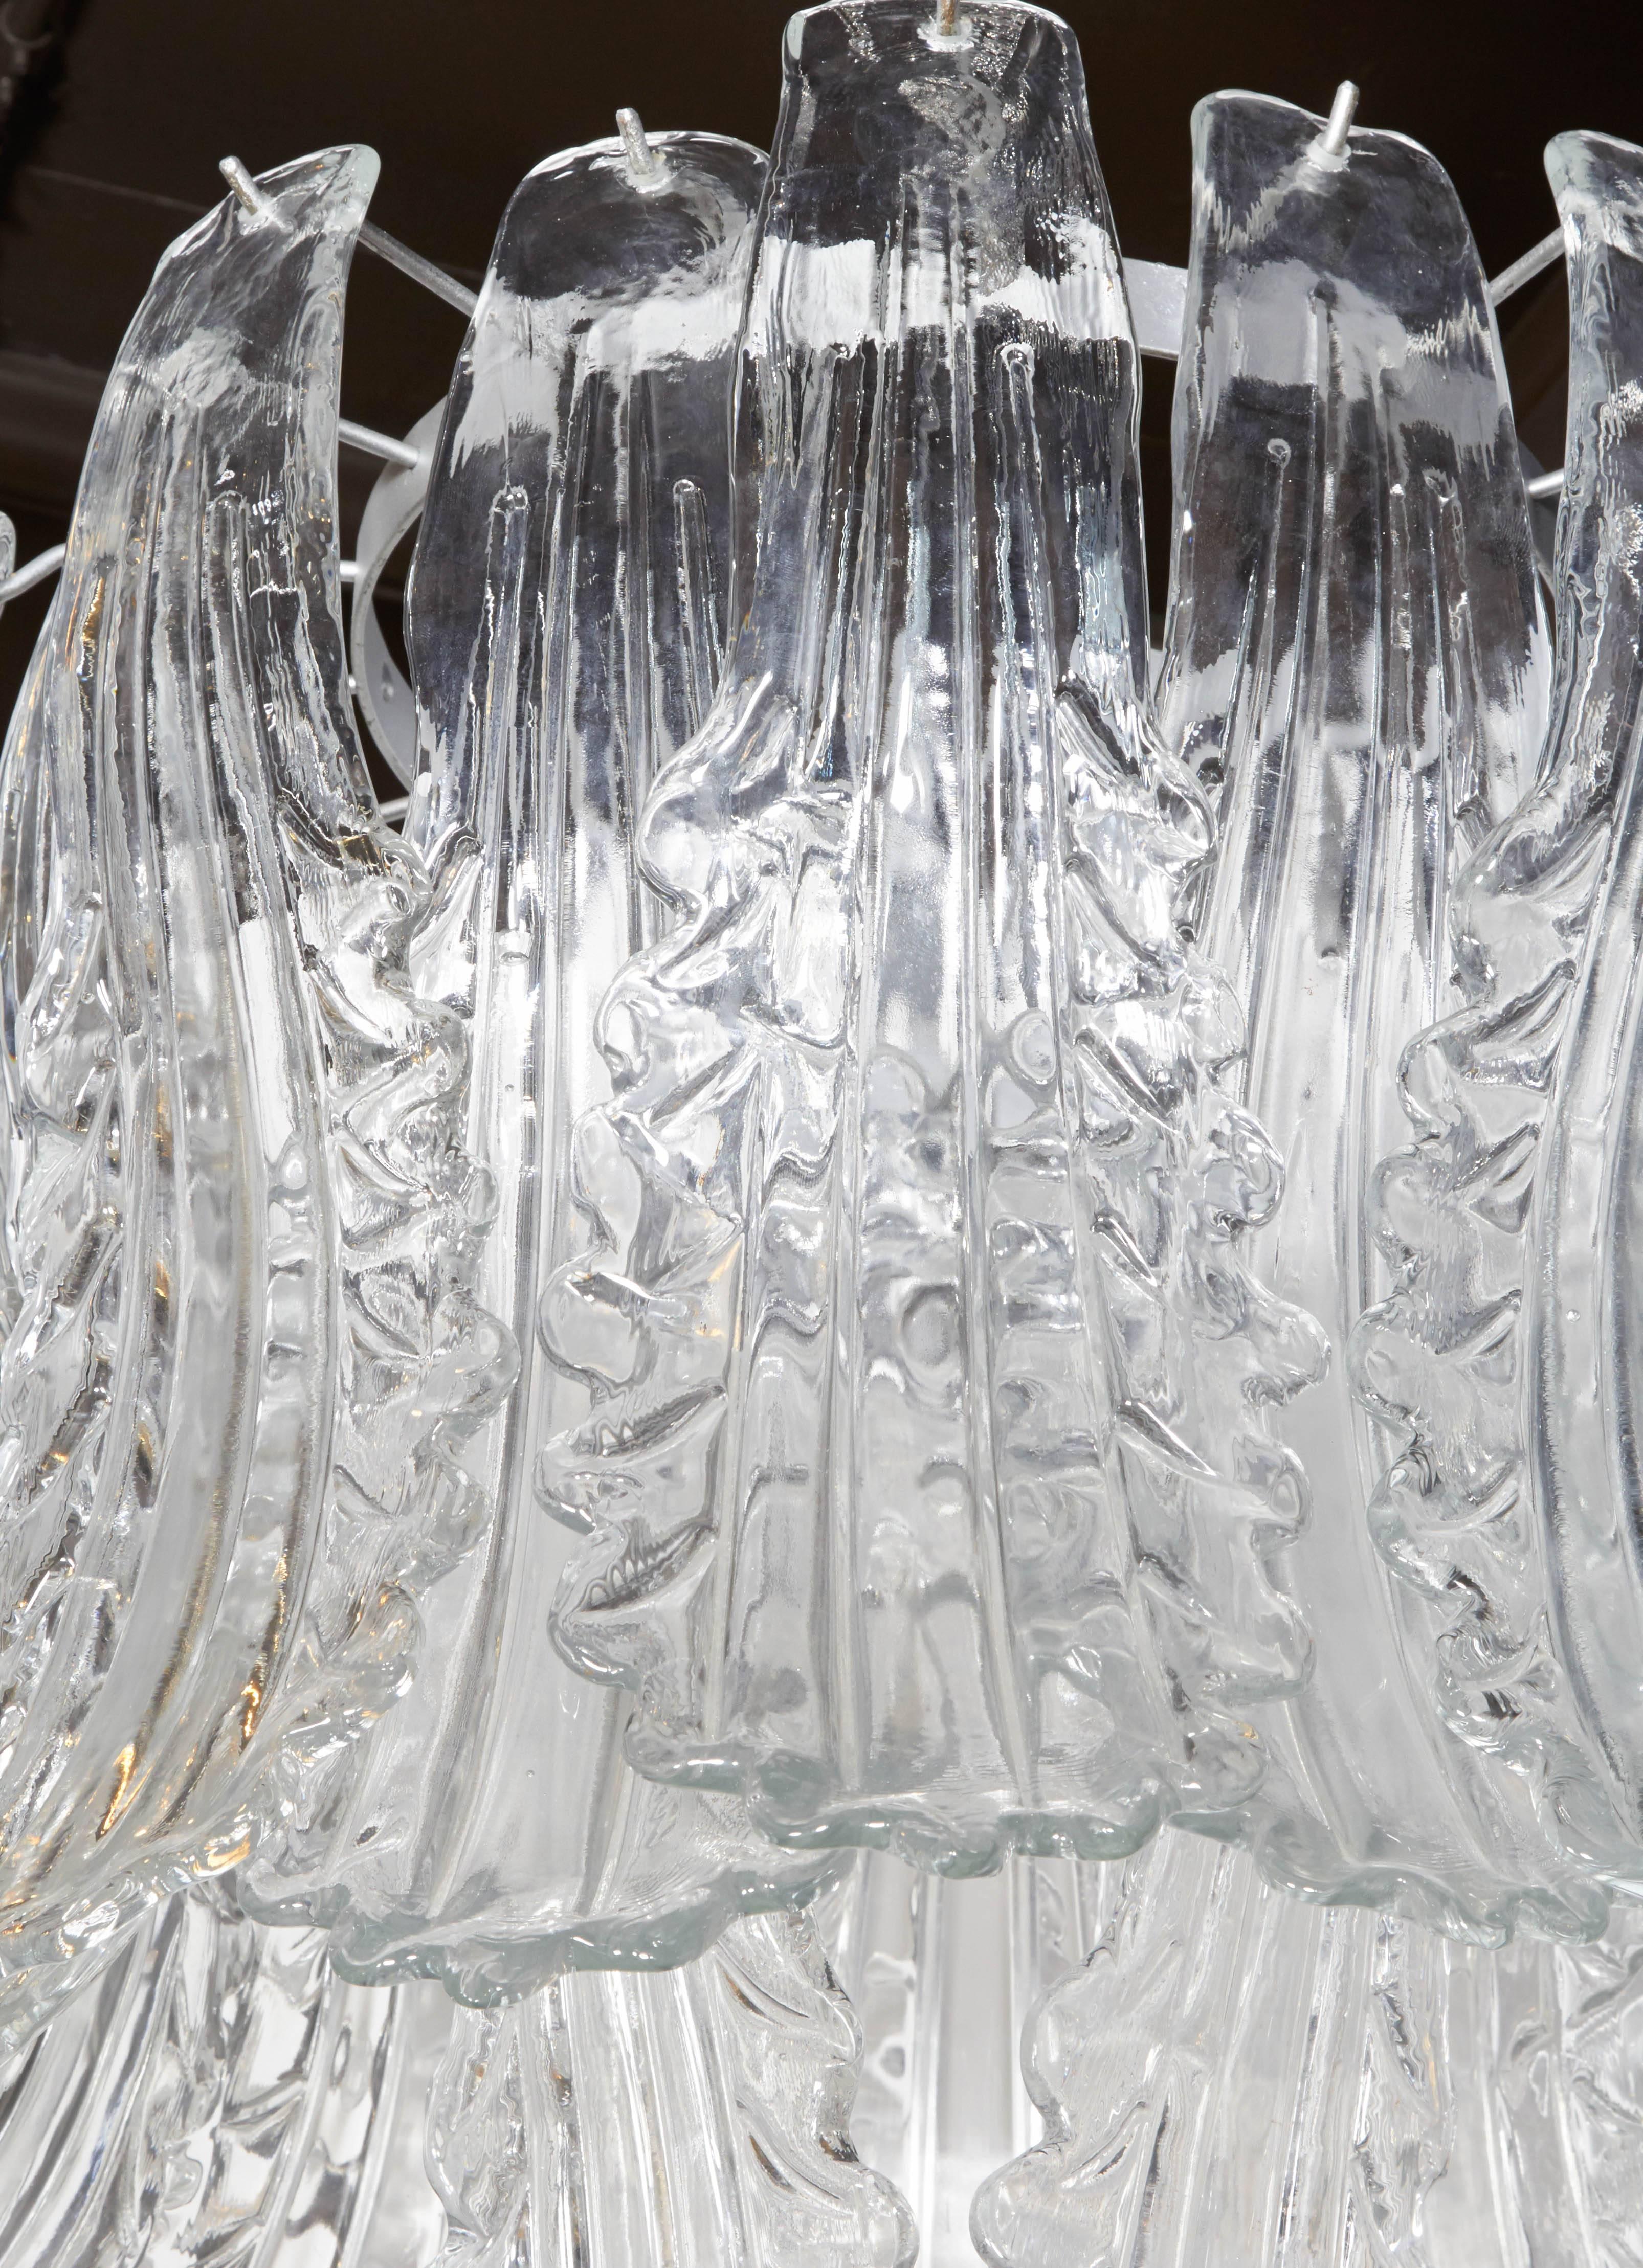 Exquisite Chandelier with Stylized Murano Glass Leaves by Barovier & Toso 1